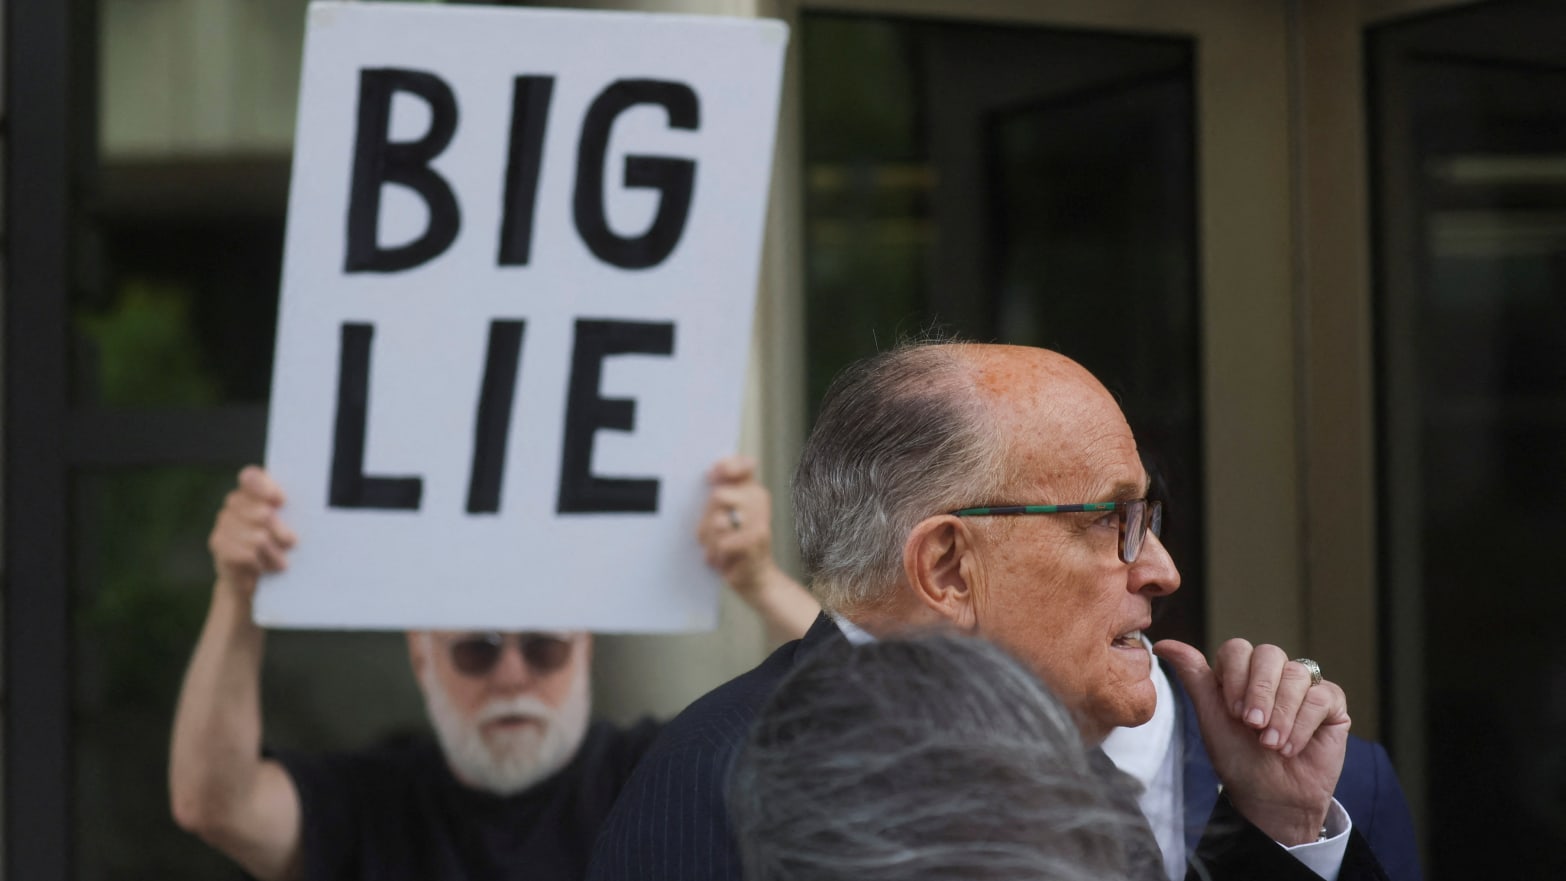 Rudy Giuliani, wearing a suit, leaves a courthouse flanked by protesters, including one holding a sign that says, “BIG LIE.”